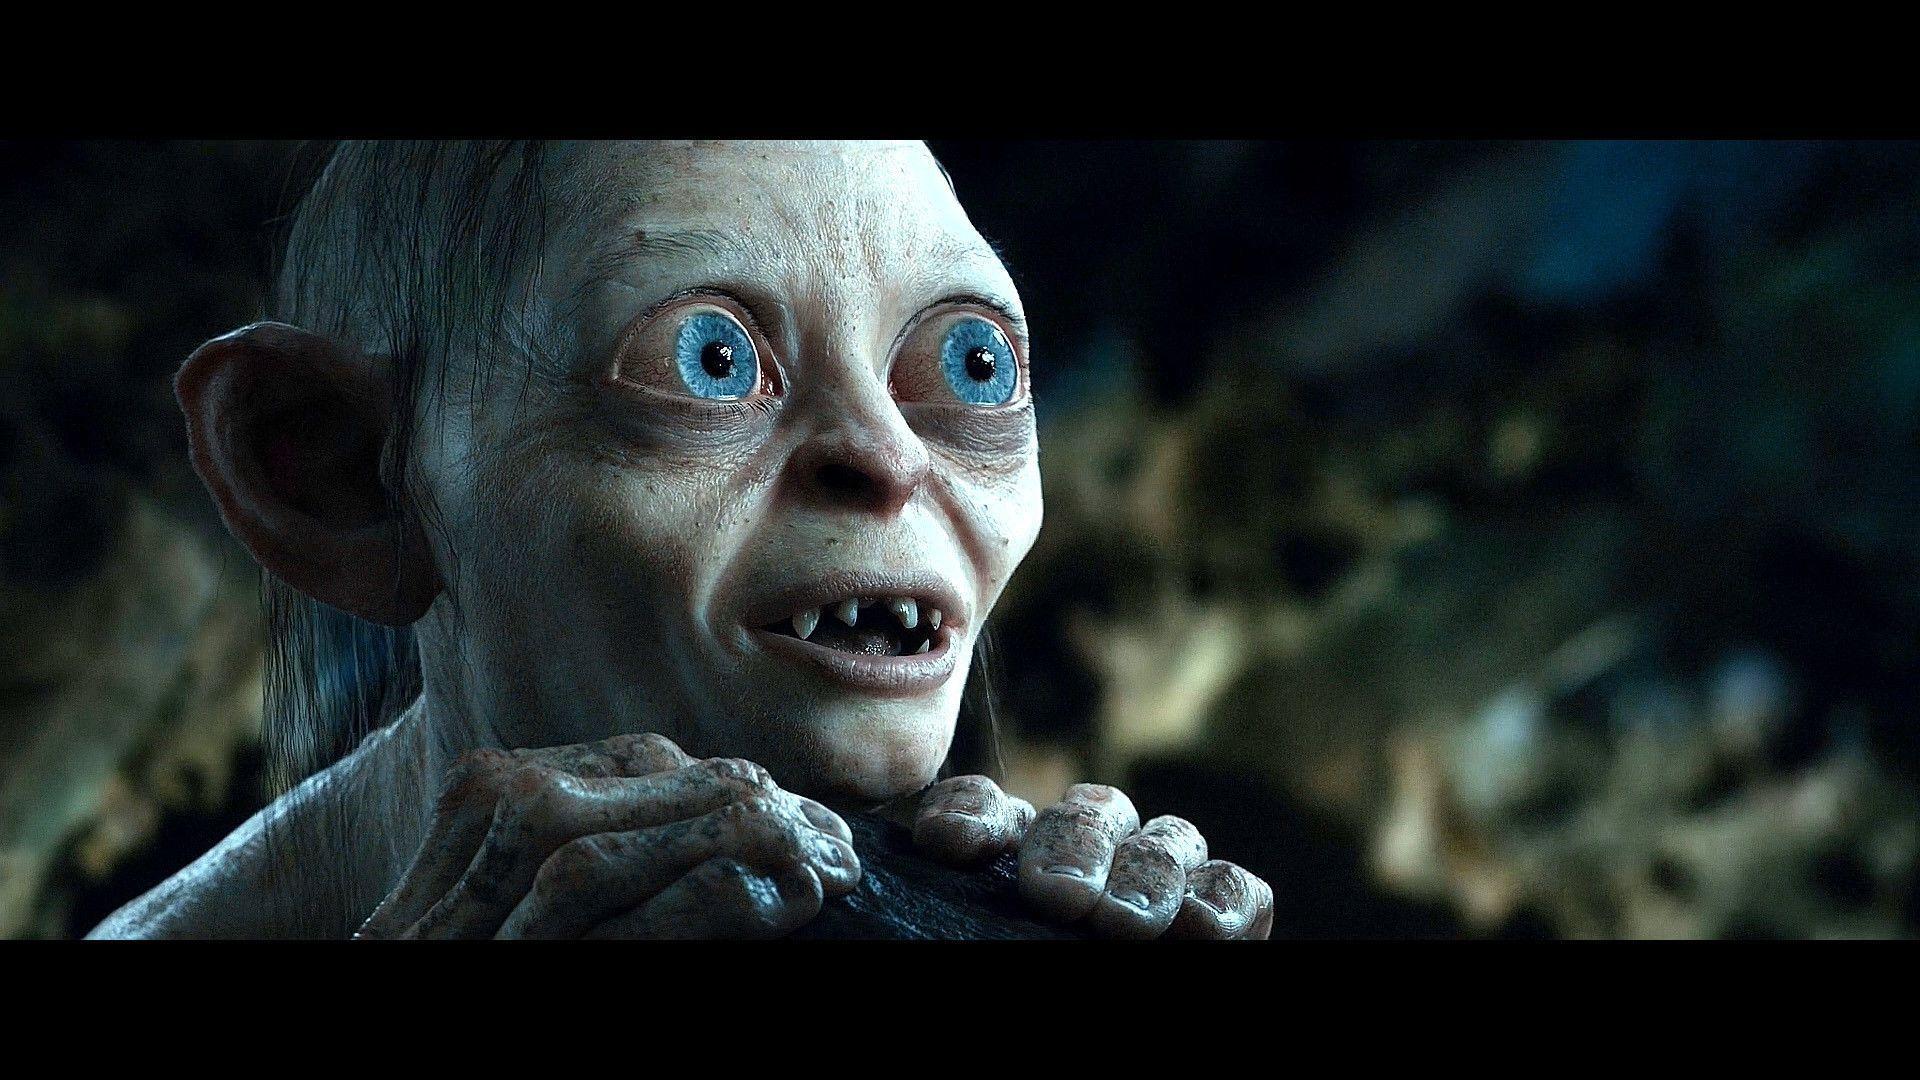 the lord of the rings and gollum